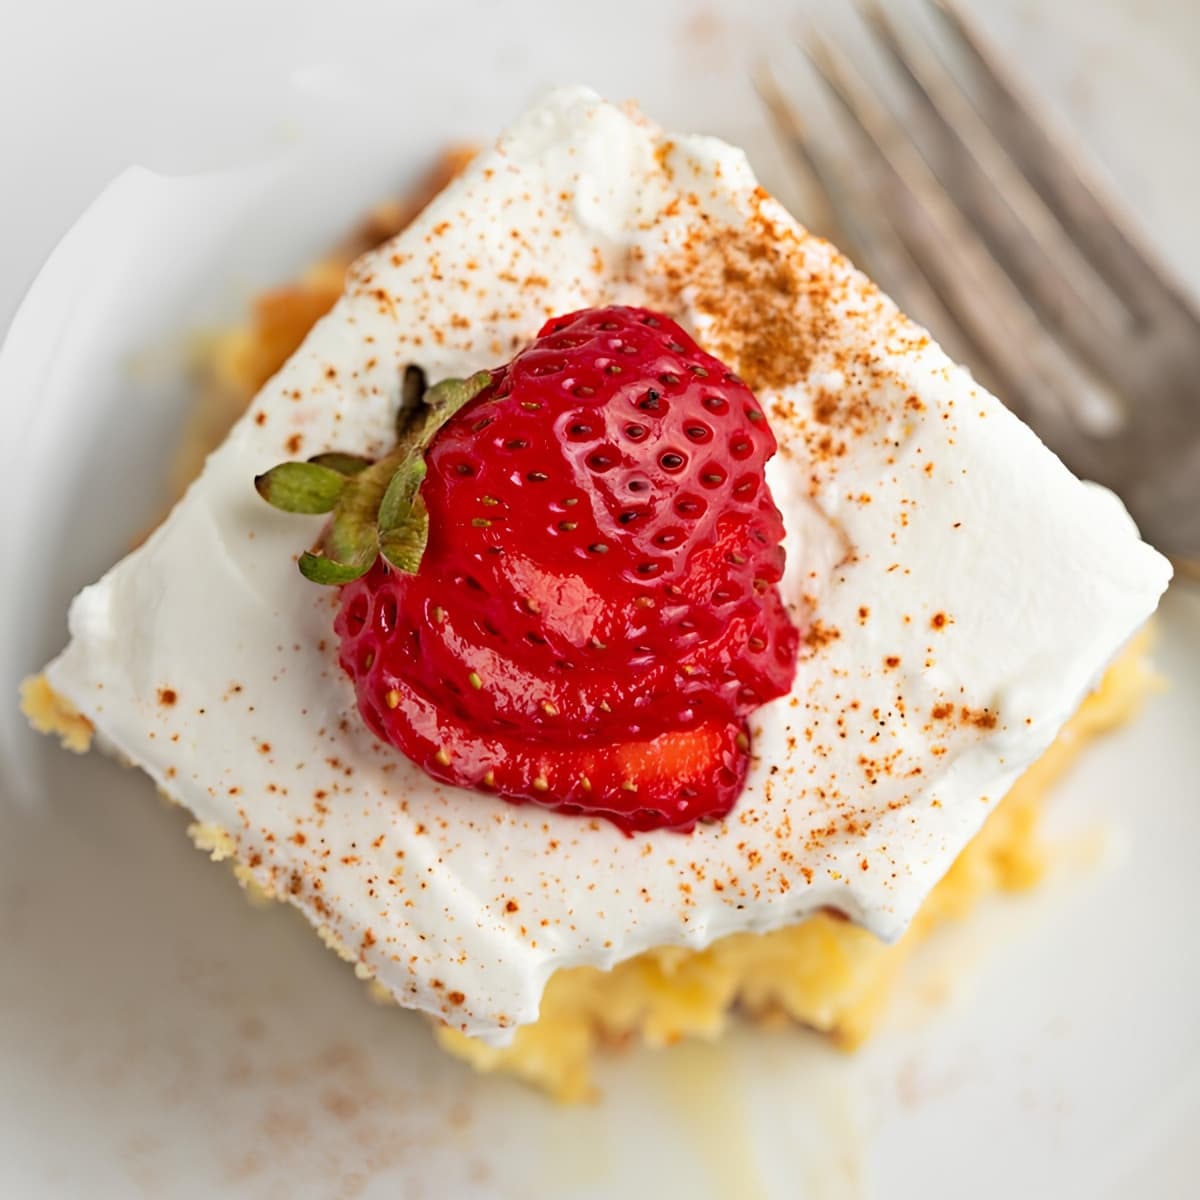 Homemade Tres Leches Cake with Strawberry Top View